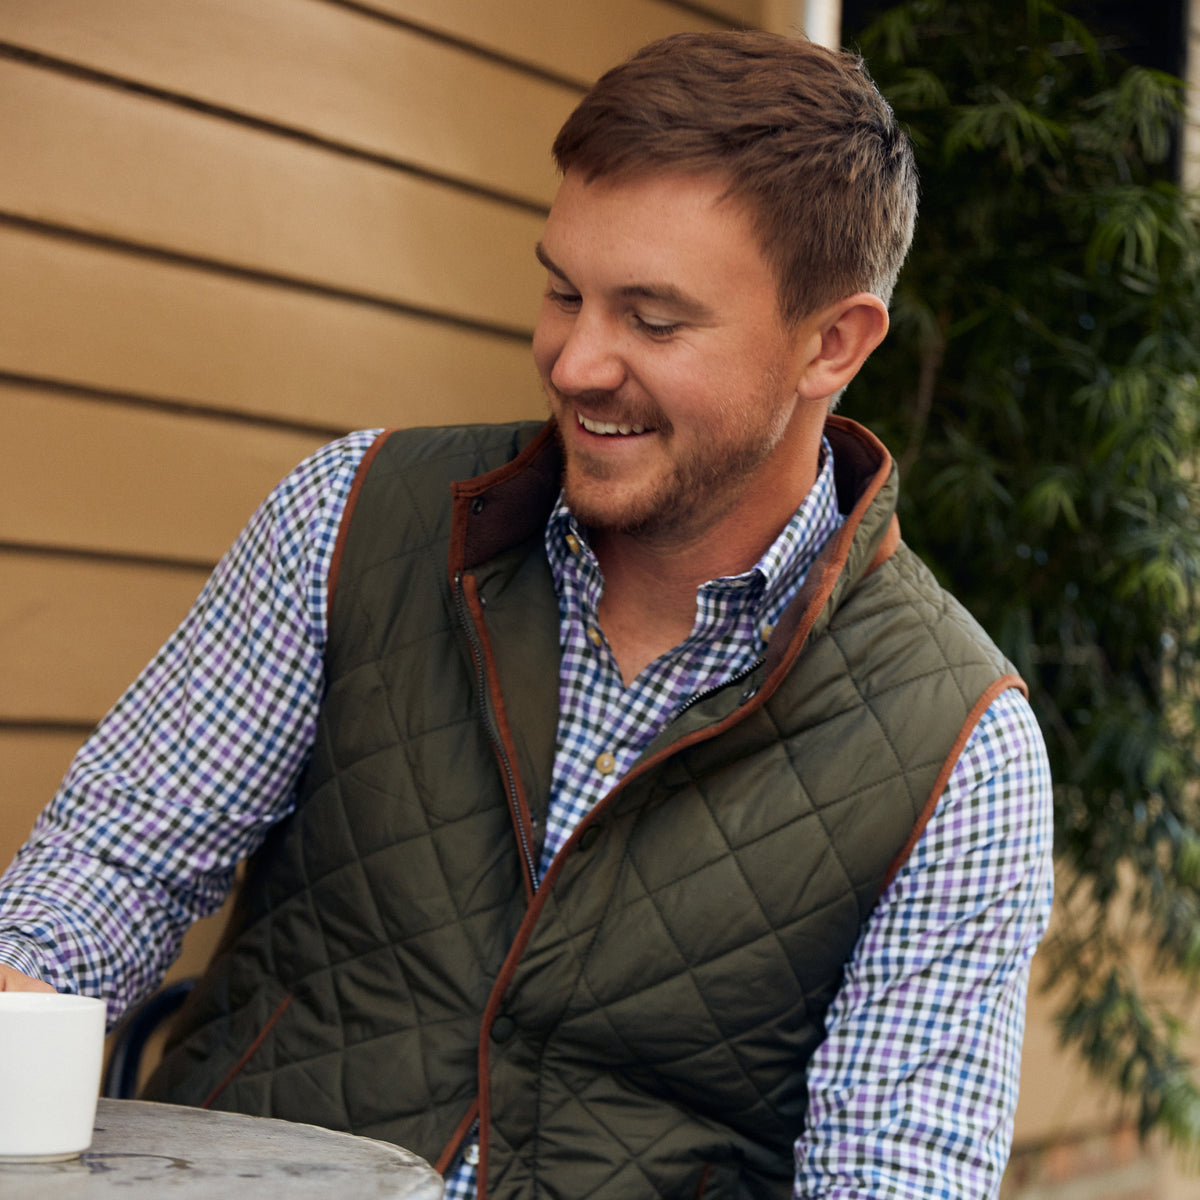 Saturday morning to Saturday night, The Sportsman was designed with interior pockets for all your gear. Get ready for the outdoors and good times!   100% Polyester Quilted Vest • Soft Fleece Interior • Full Front Hidden Zip with Snap Button Closure • Four Inside Utility Pockets • Machine Wash • Imported